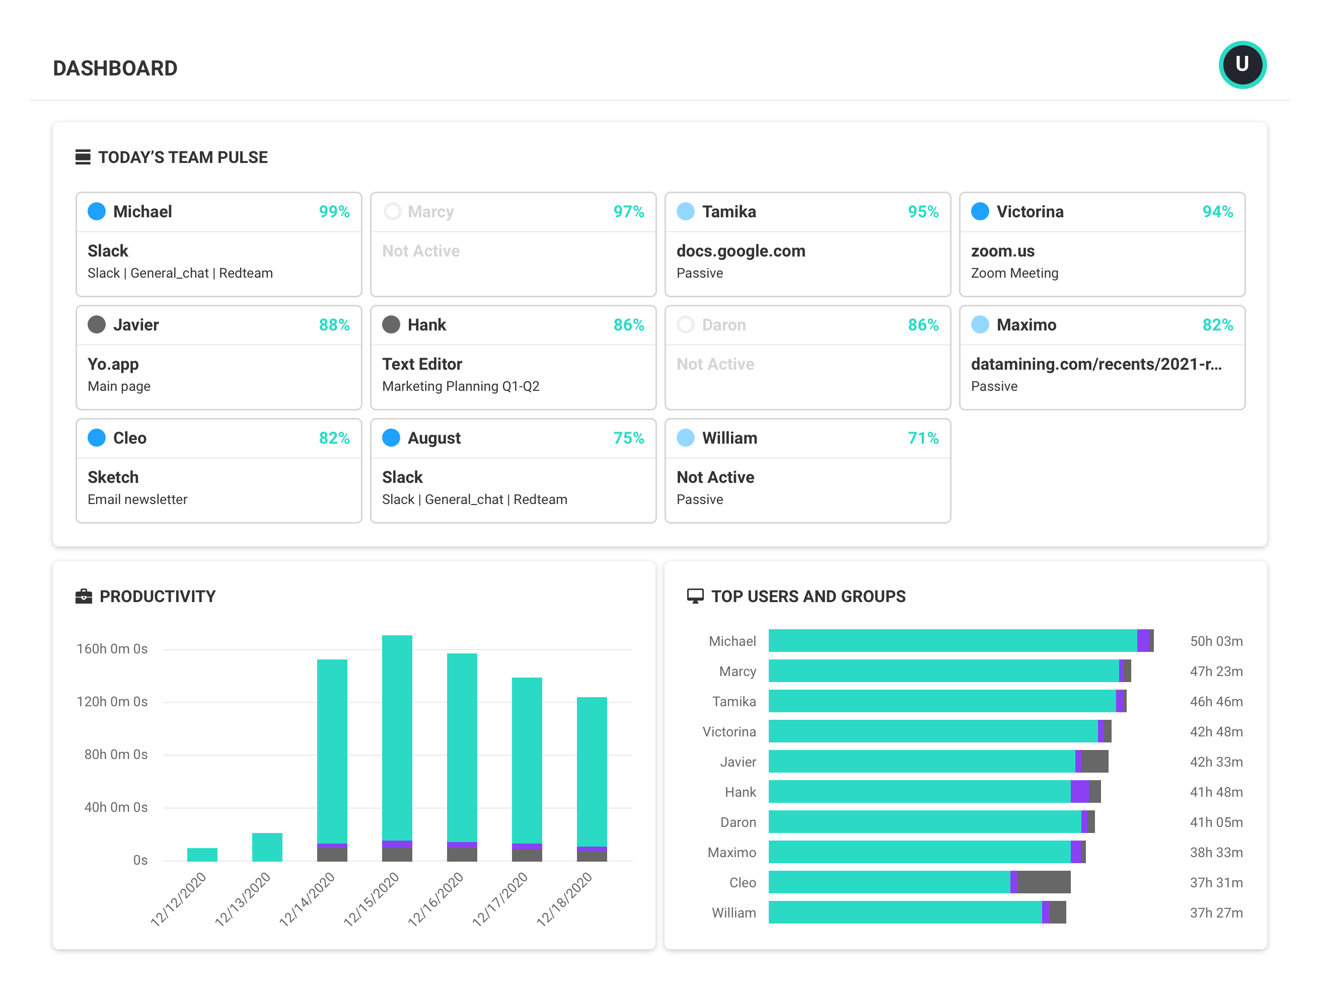 An ActivTrak dashboard showing today's team pulse, productivity and top users and groups.